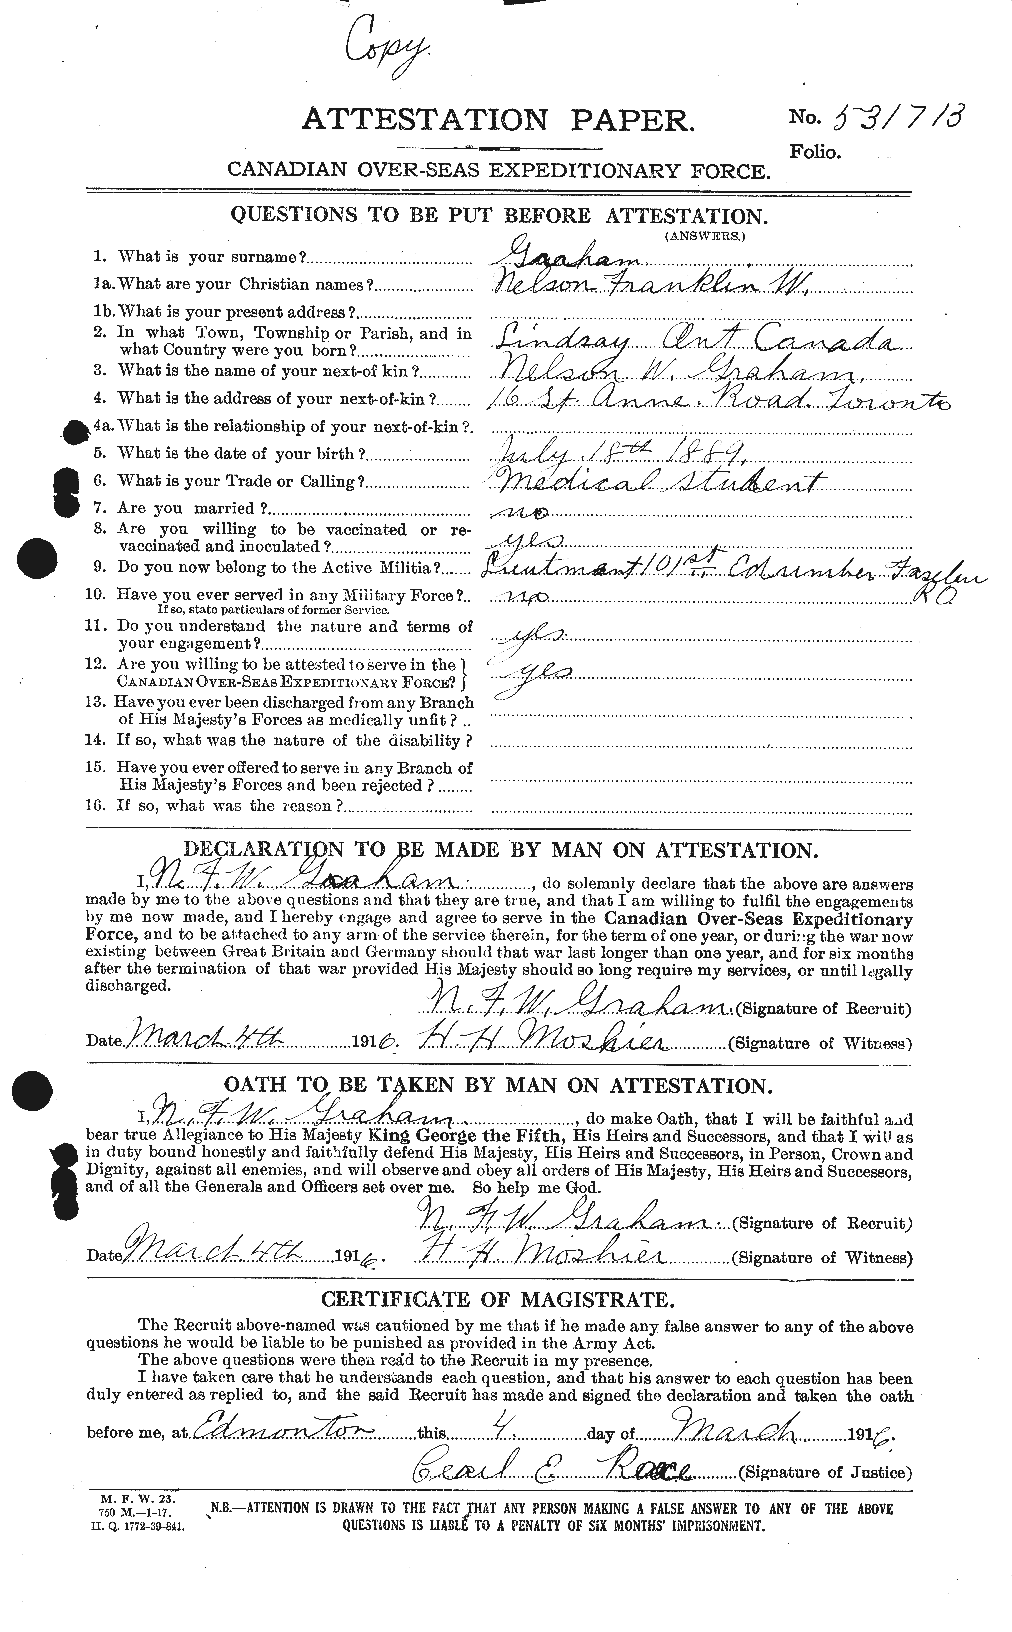 Personnel Records of the First World War - CEF 359316a